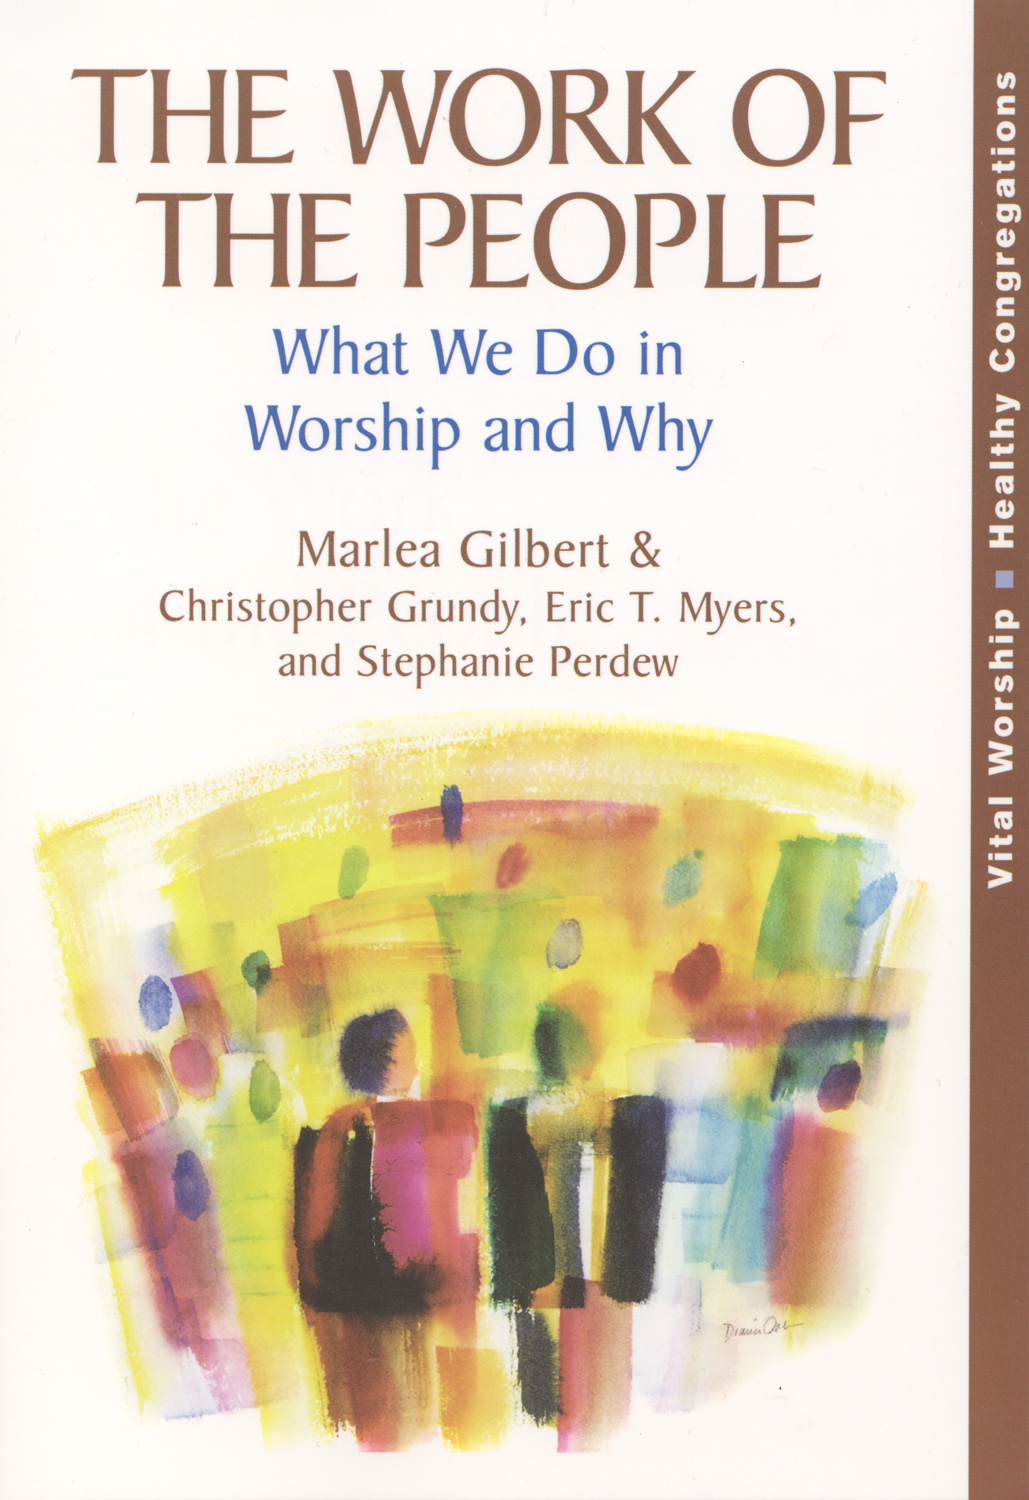 The Work of the People: What We Do in Worship and Why